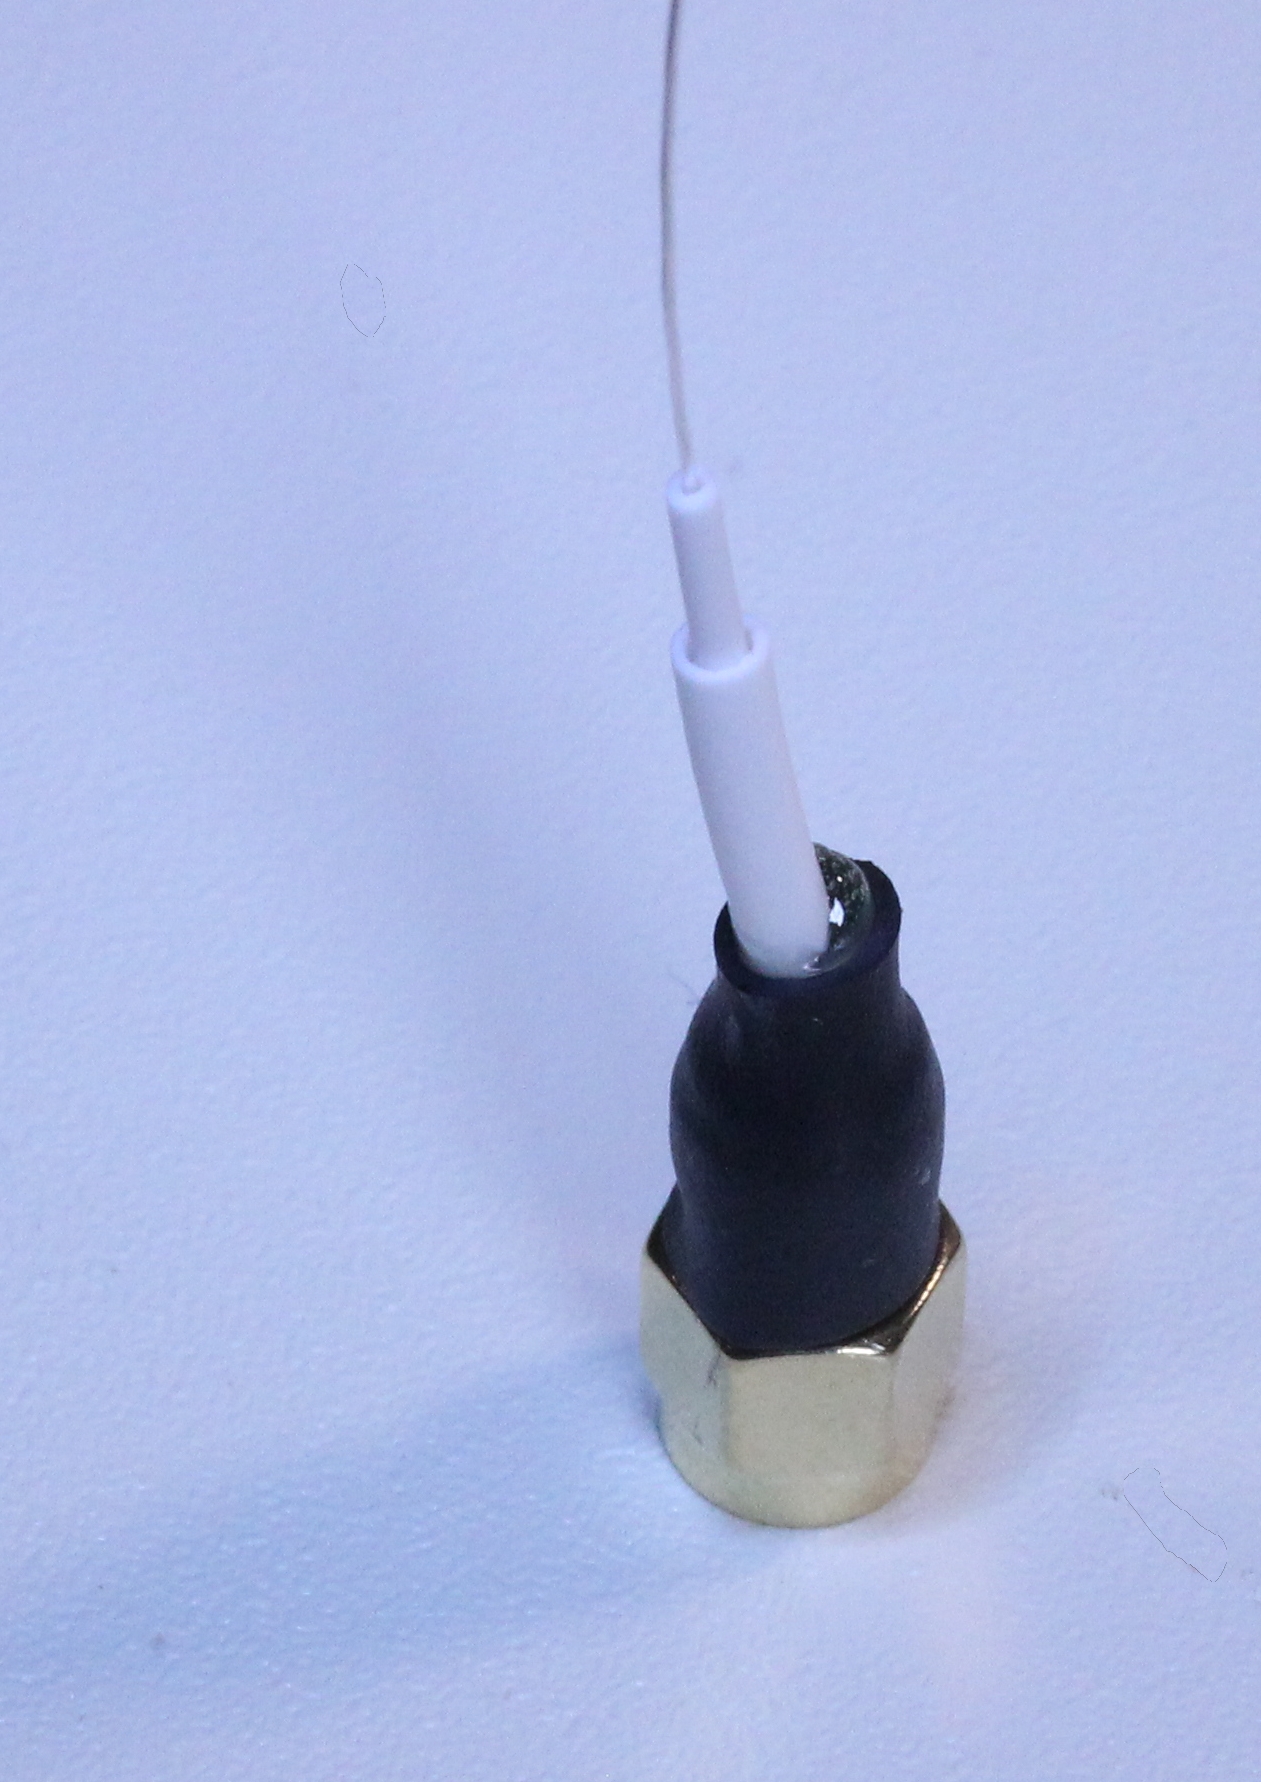 Completed host-side of coaxial cable.